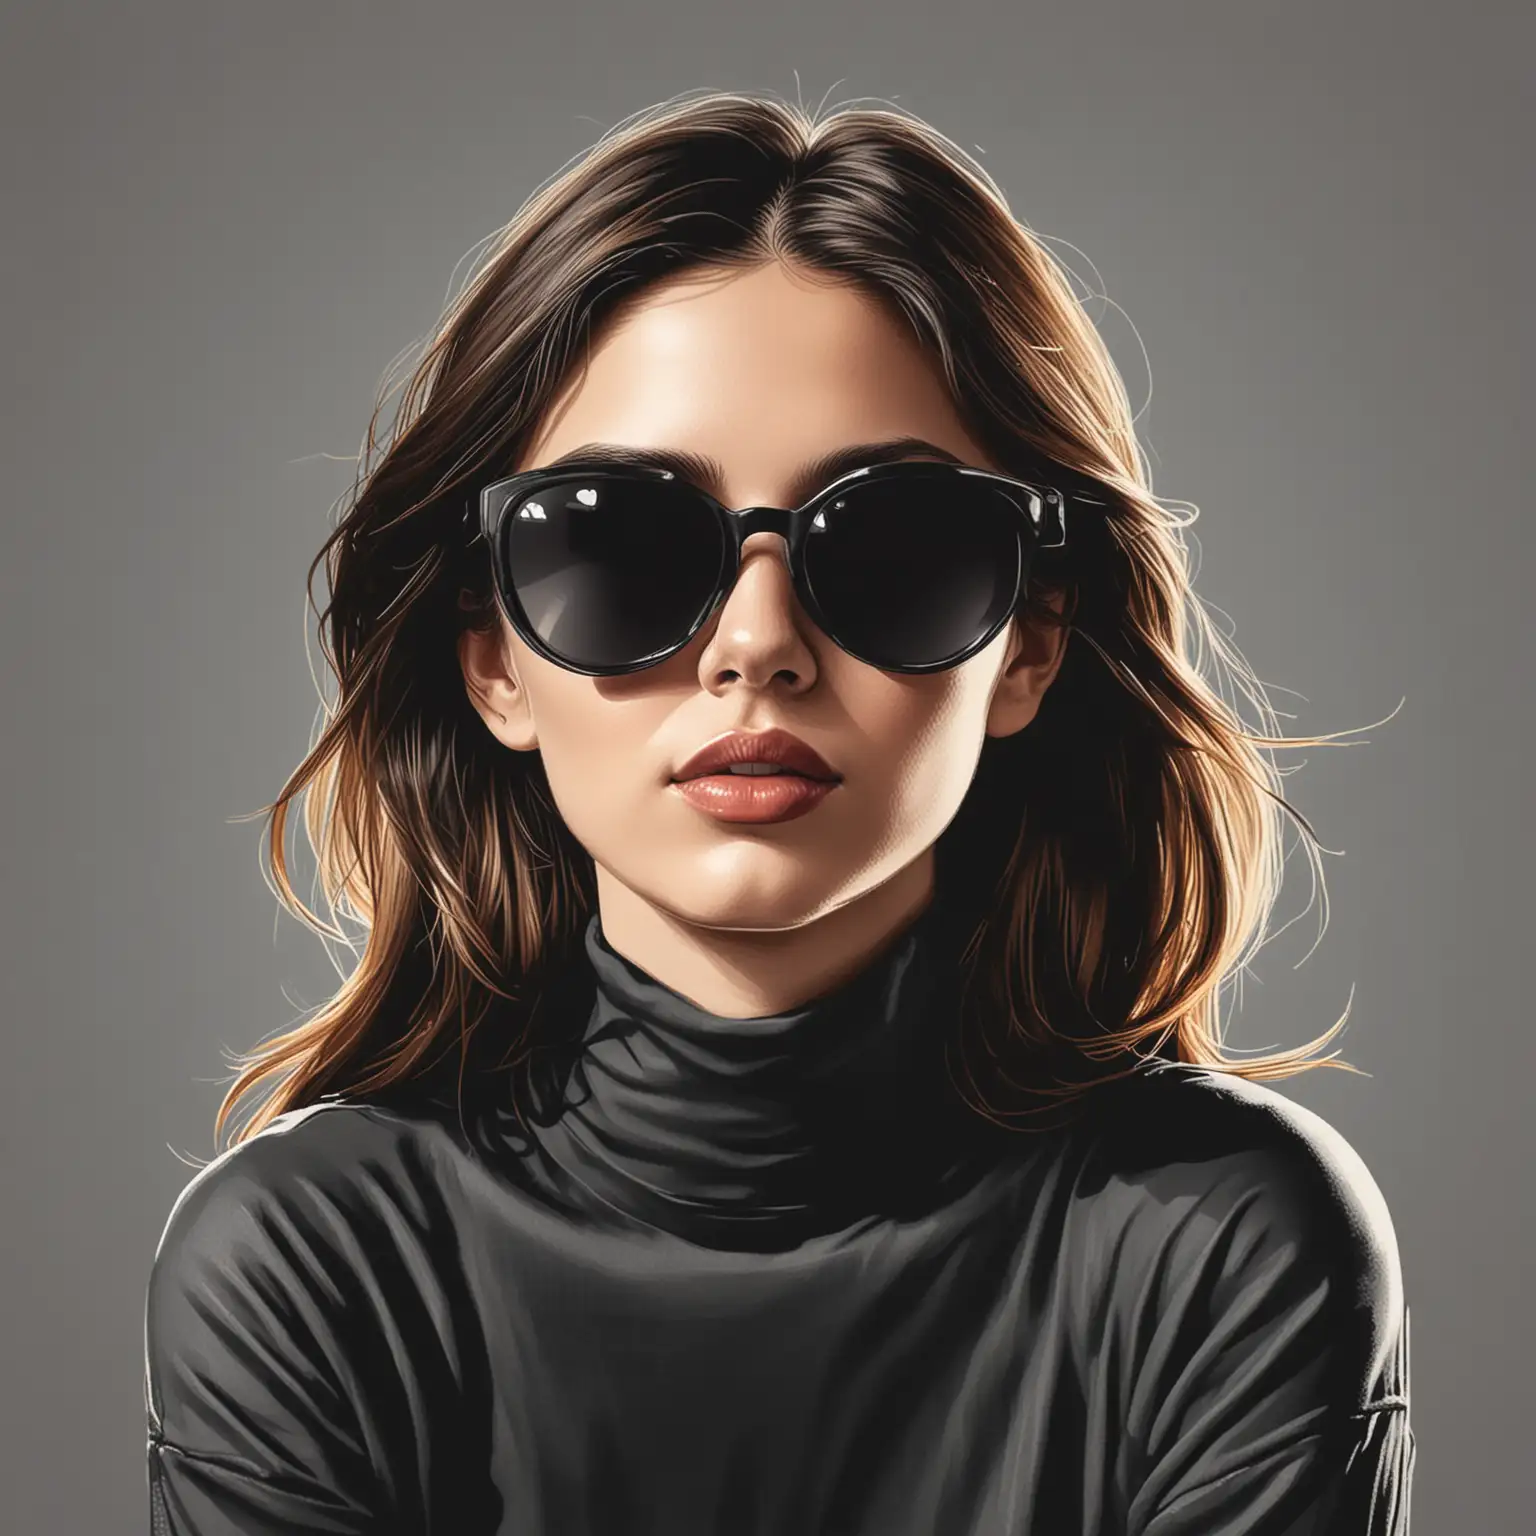 Vector illustration of a sitting woman with black sunglasses on her face